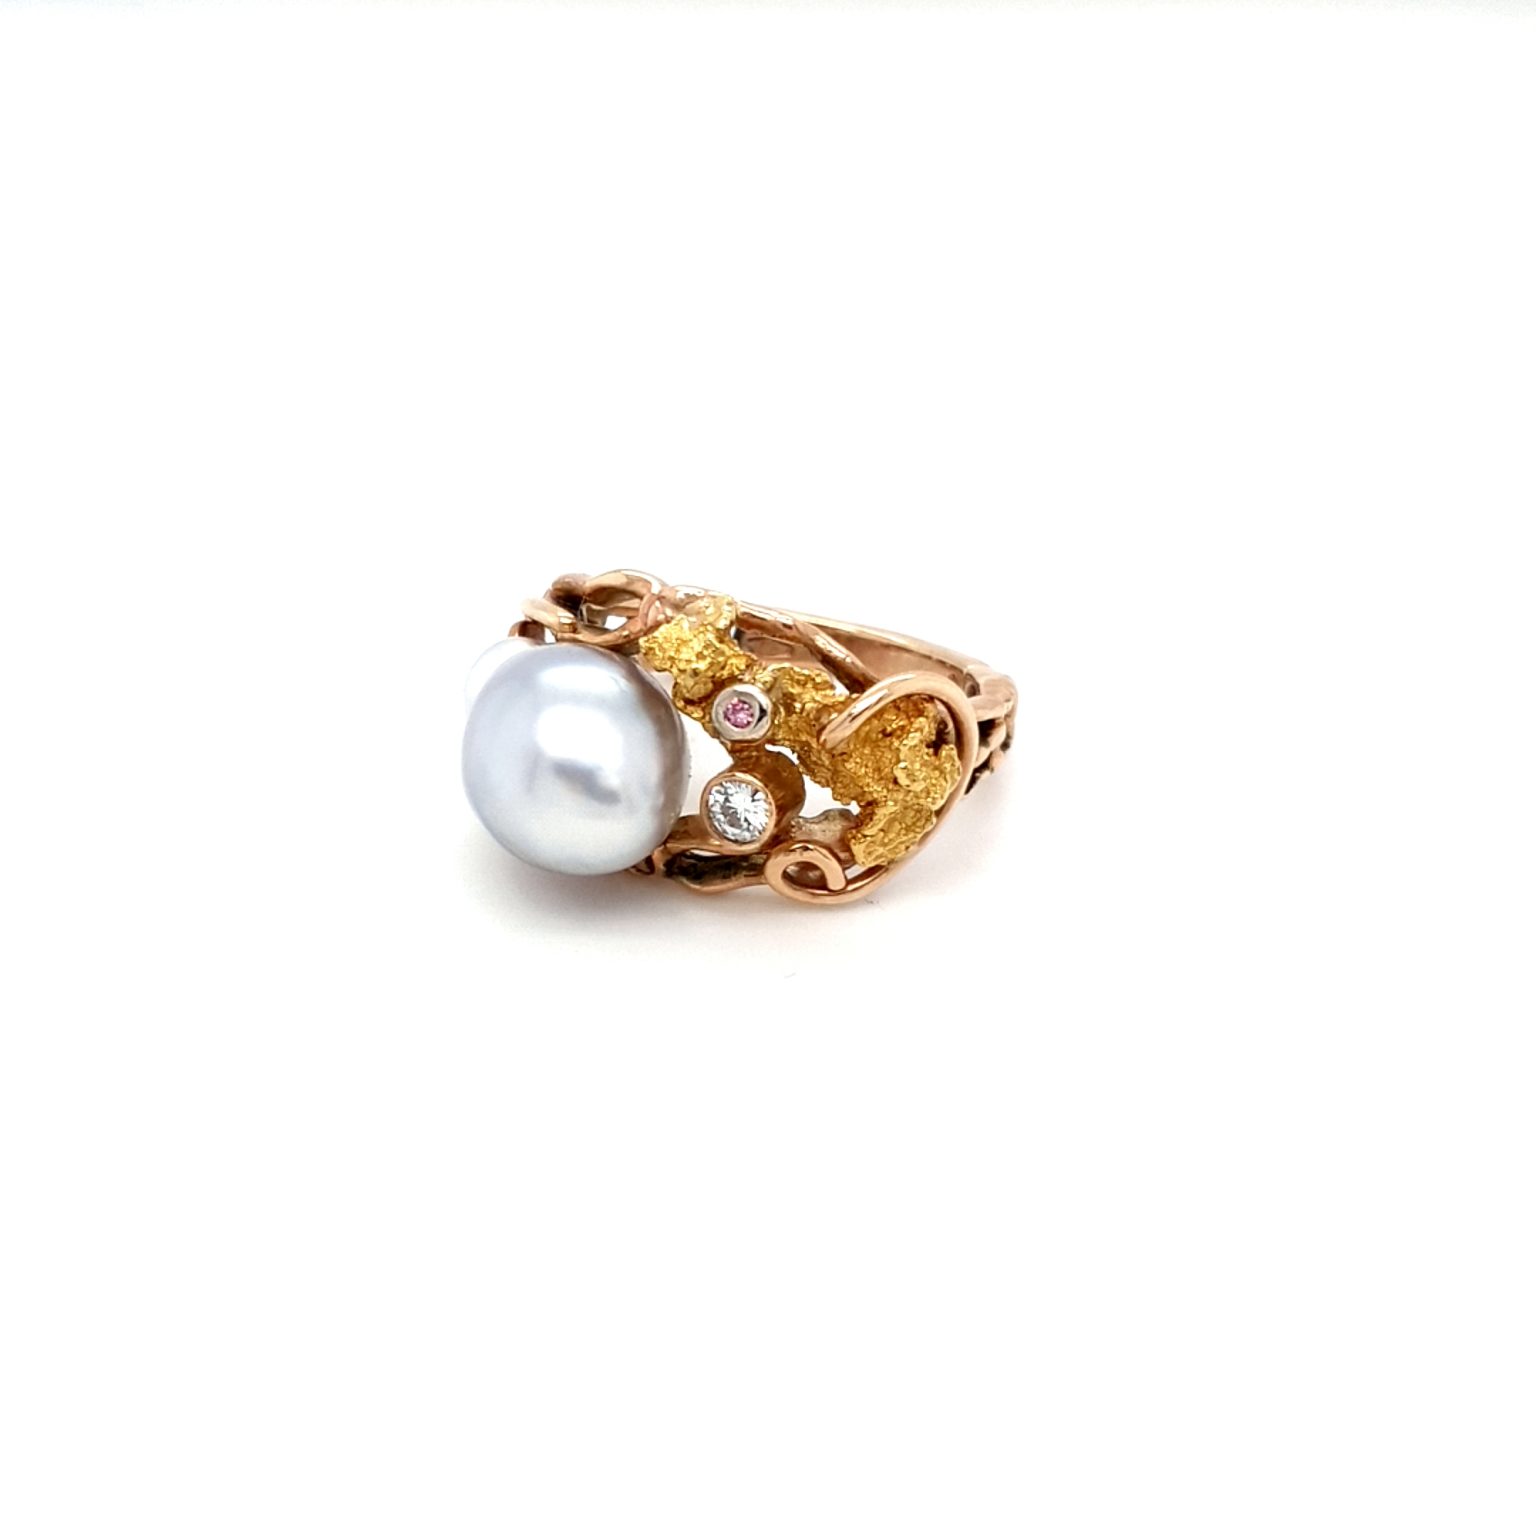 Leon Bakers 9K Yellow Gold Handmade Pearl and Gold Nugget Ring_1